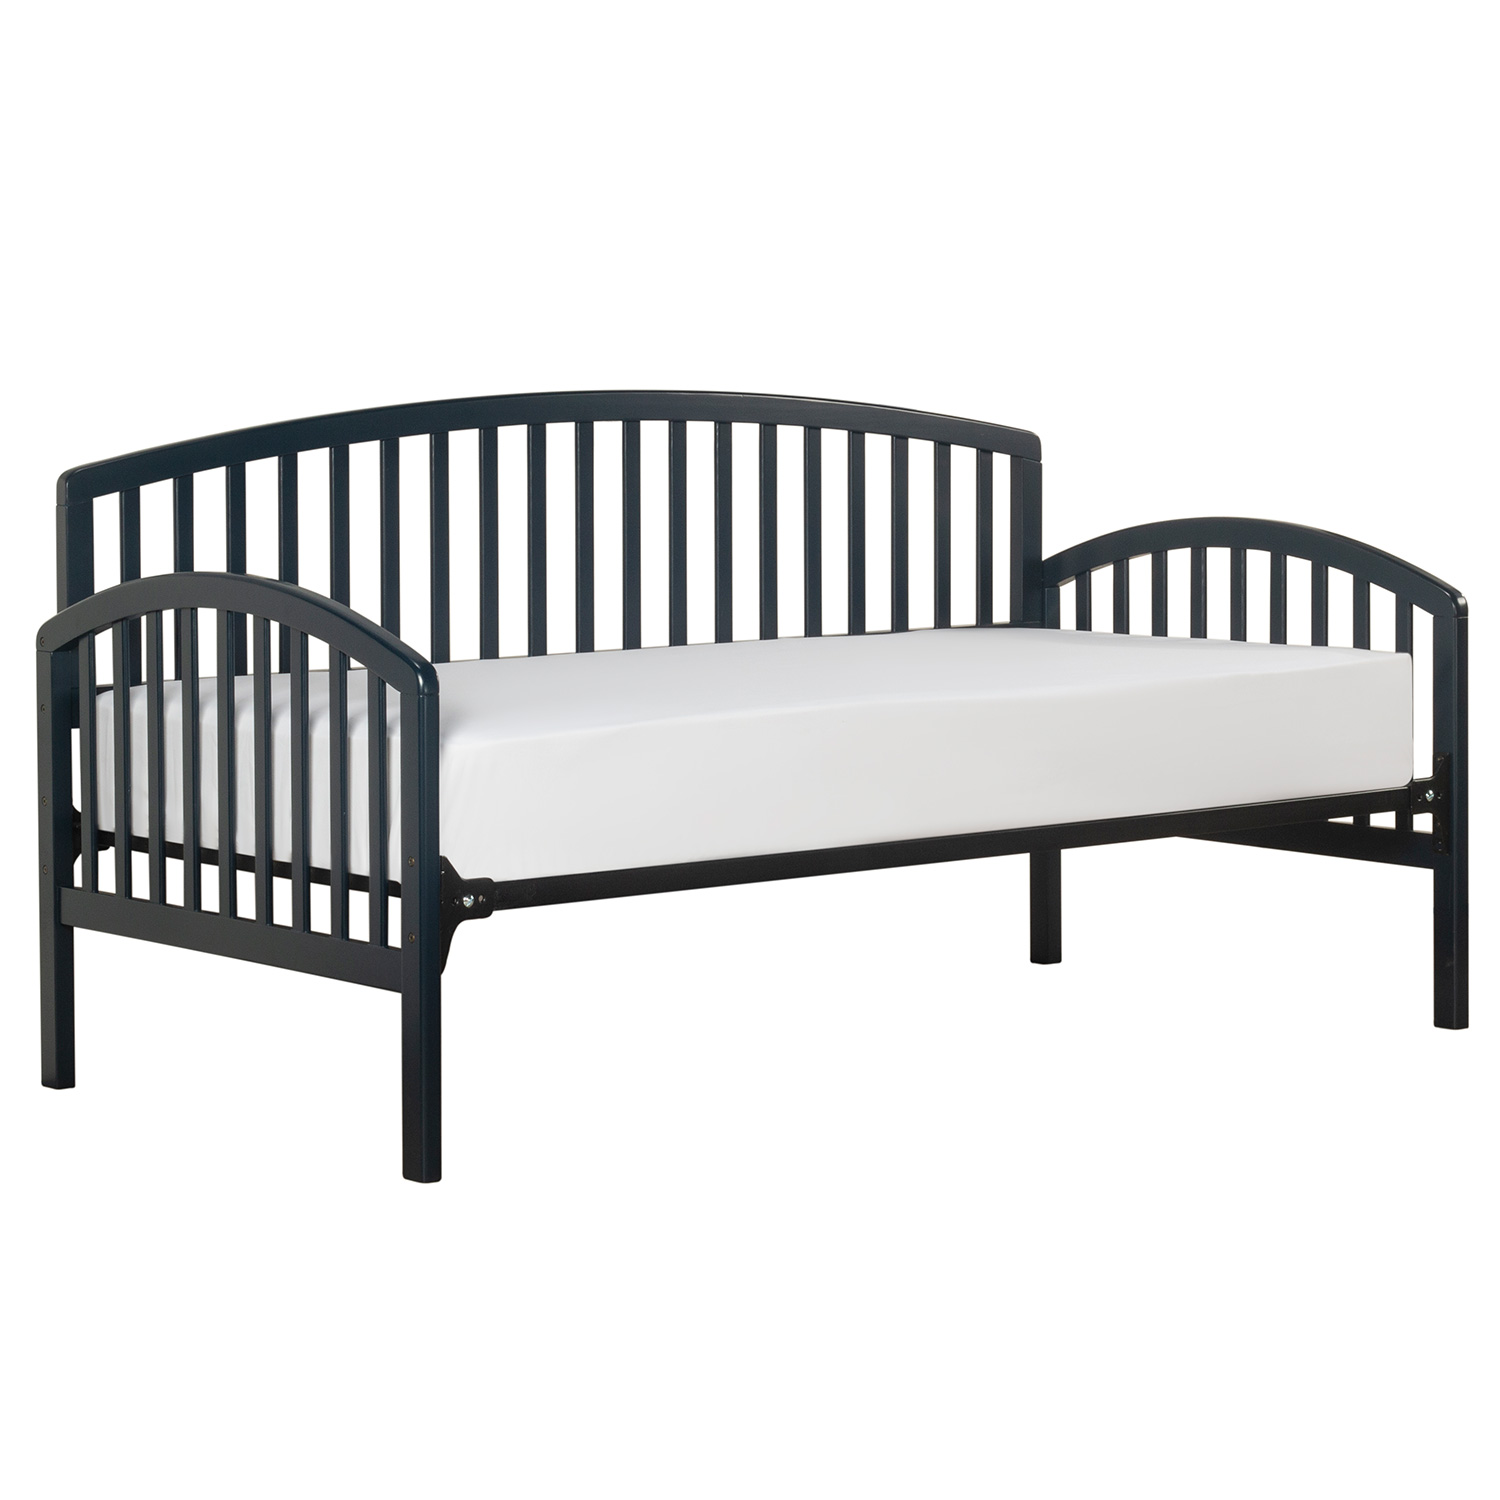 Hillsdale Carolina Daybed with Suspension Deck - Navy